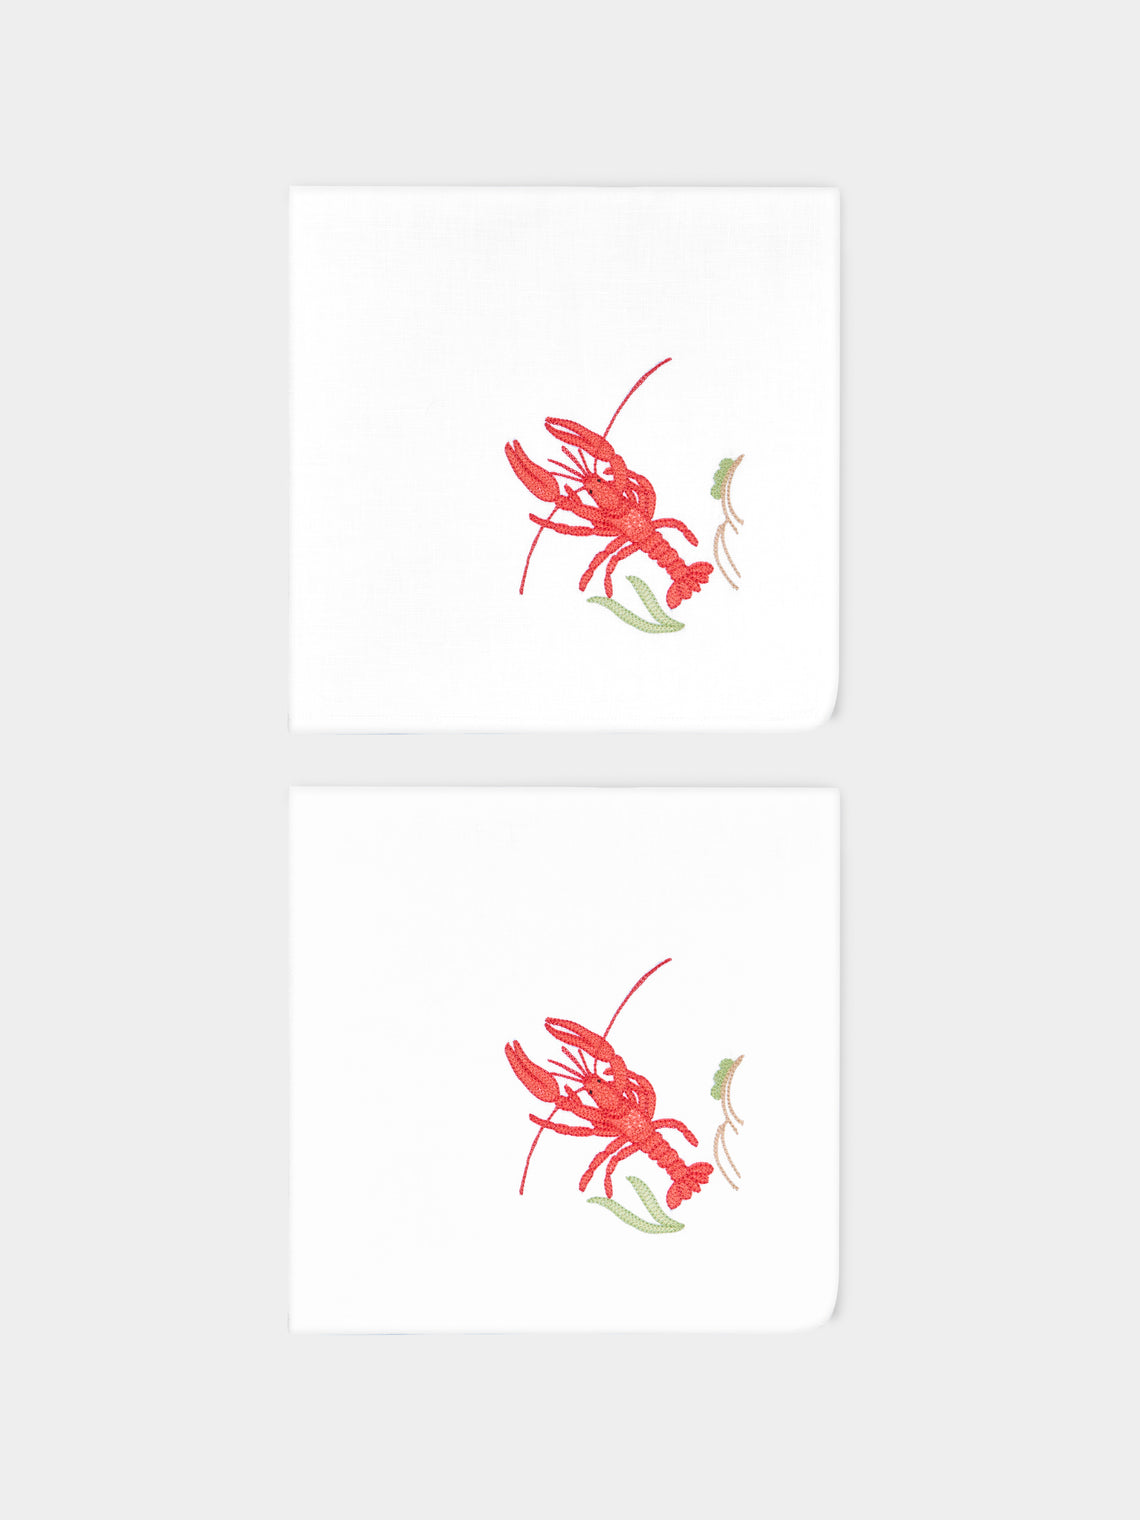 Loretta Caponi - Lobster Hand-Embroidered Linen Napkins (Set of 2) -  - ABASK